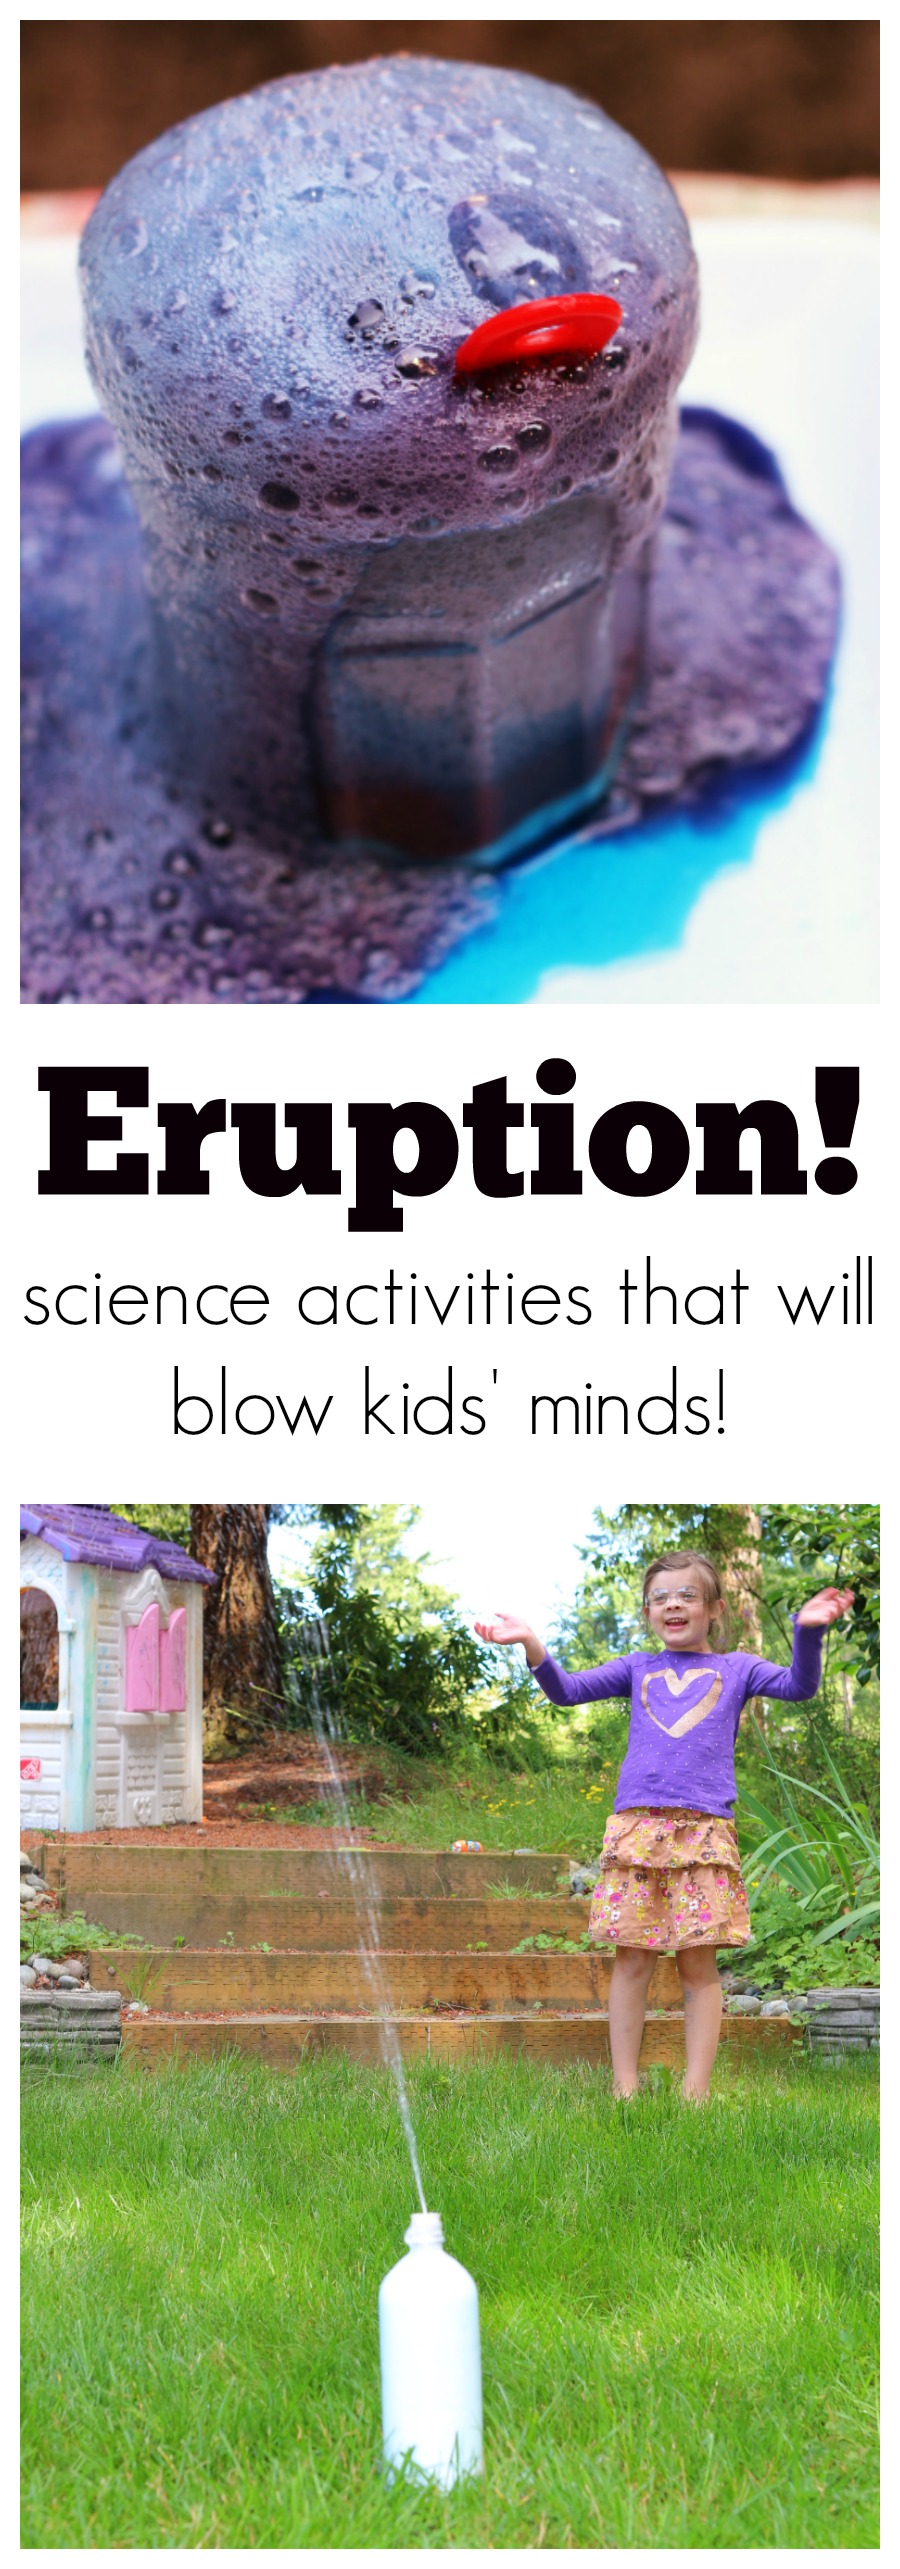 eruption science - part of no time for flash cards summer STEM lab series of great science activities for kids.